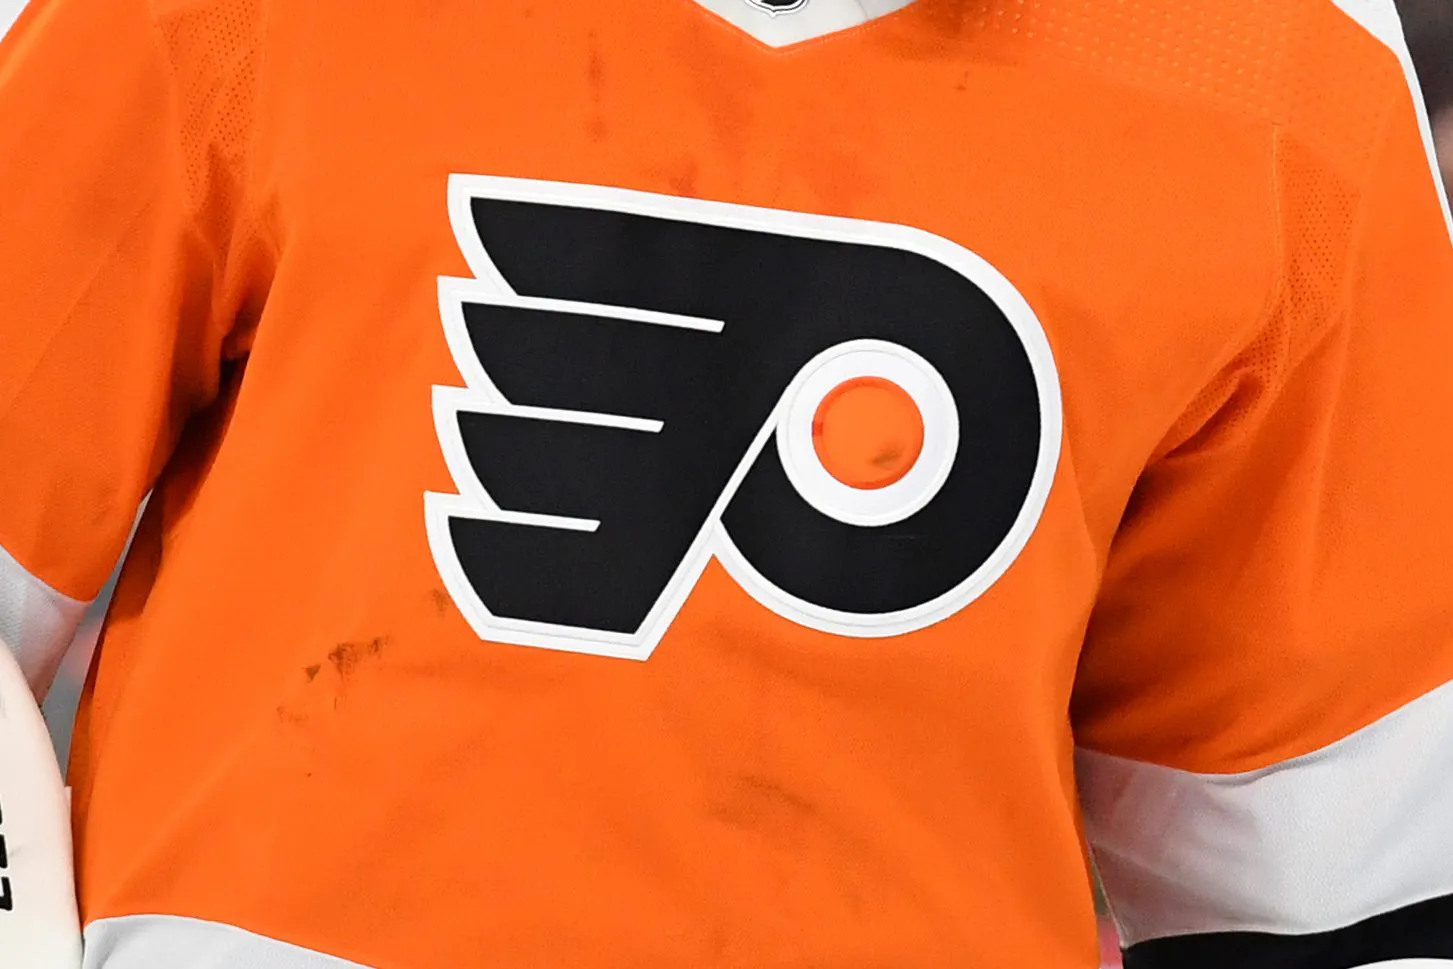 Philadelphia Flyers’ president search includes Ed Olczyk and Keith Jones as finalists